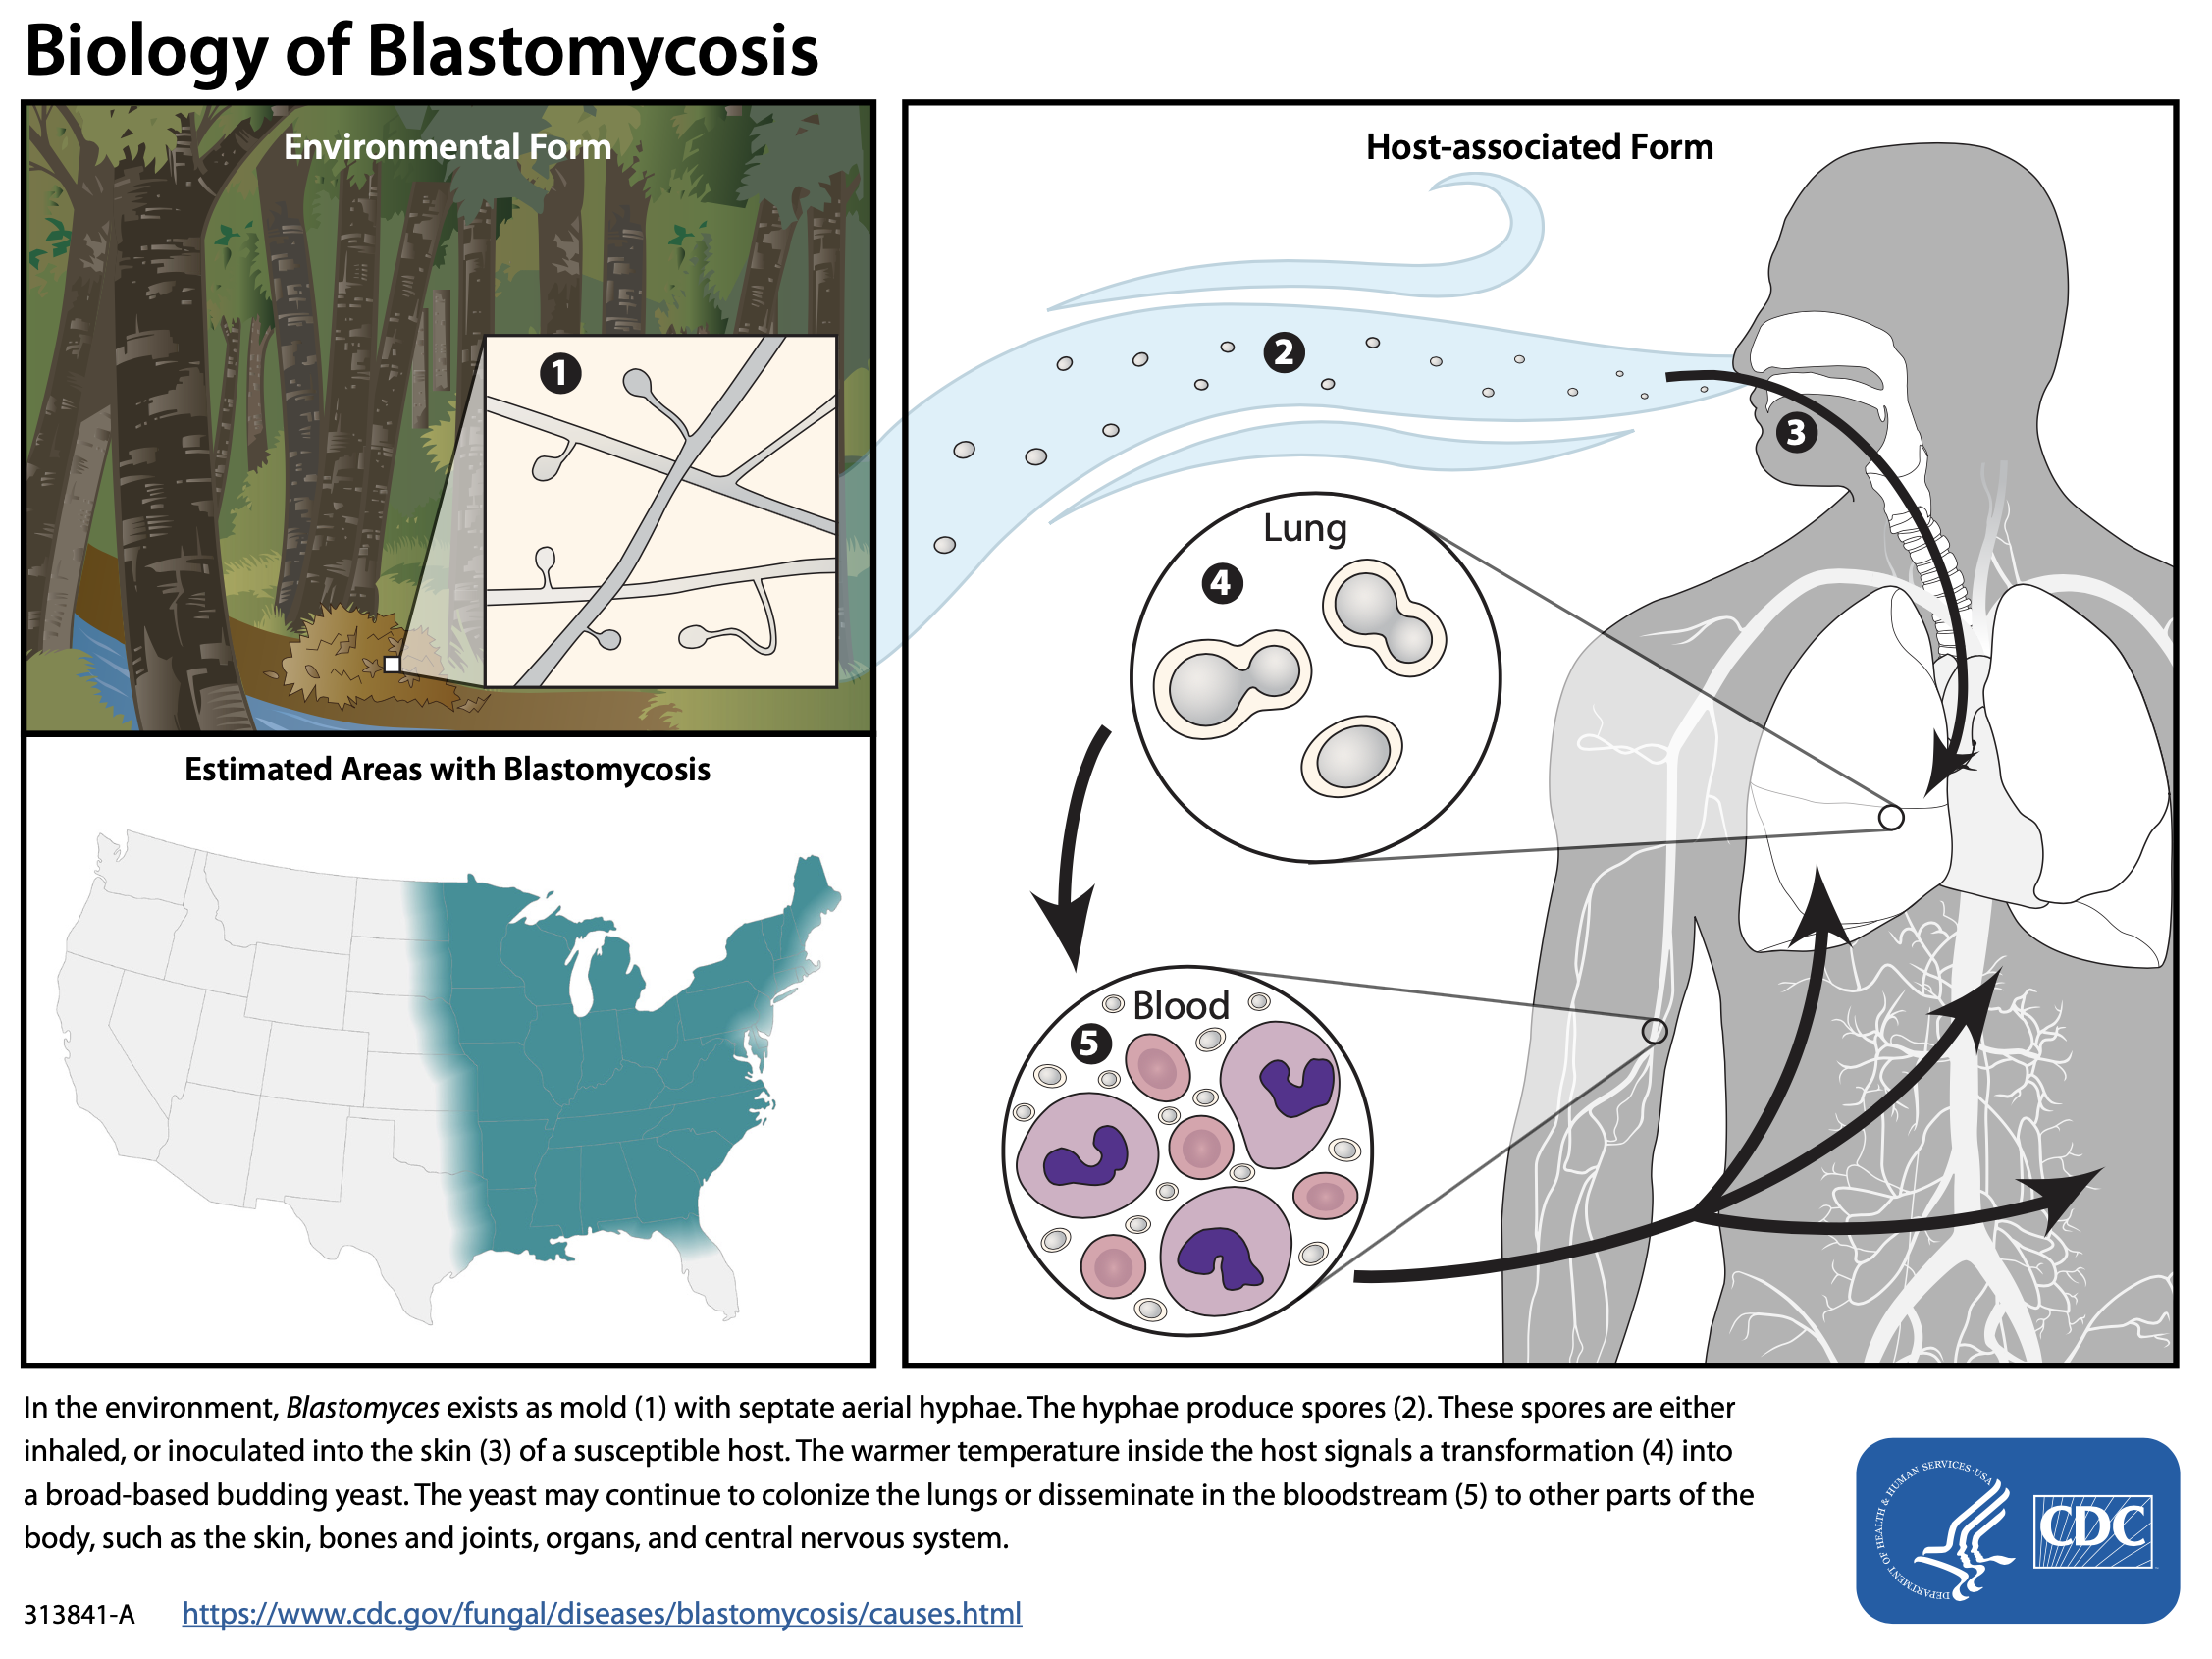 Blastomycosis can develop after humans or other mammals inhale fungal spores.